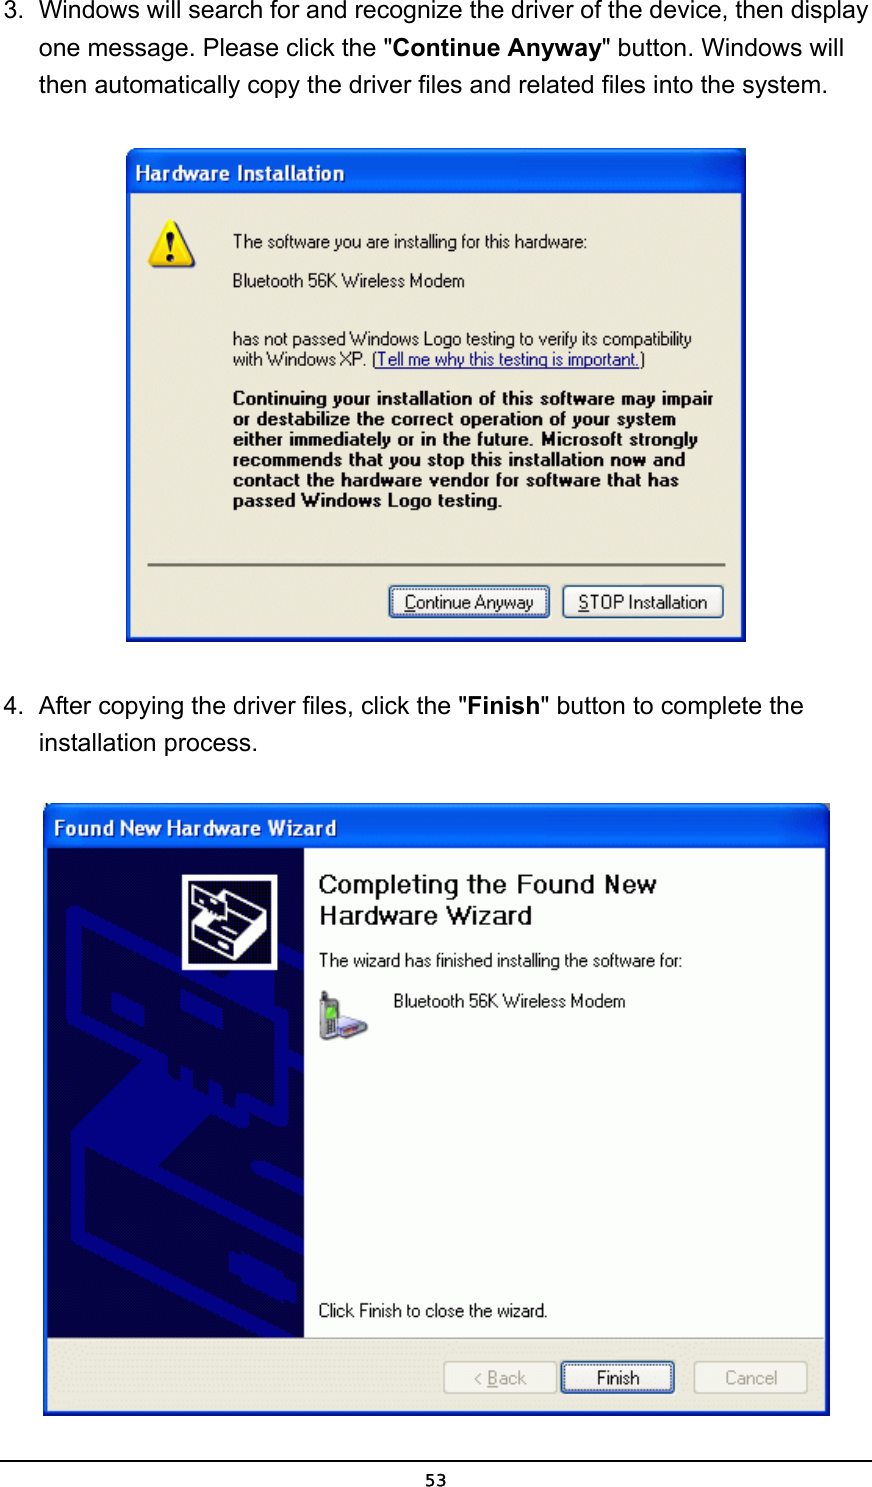   533.  Windows will search for and recognize the driver of the device, then display one message. Please click the &quot;Continue Anyway&quot; button. Windows will then automatically copy the driver files and related files into the system.  4.  After copying the driver files, click the &quot;Finish&quot; button to complete the installation process.  